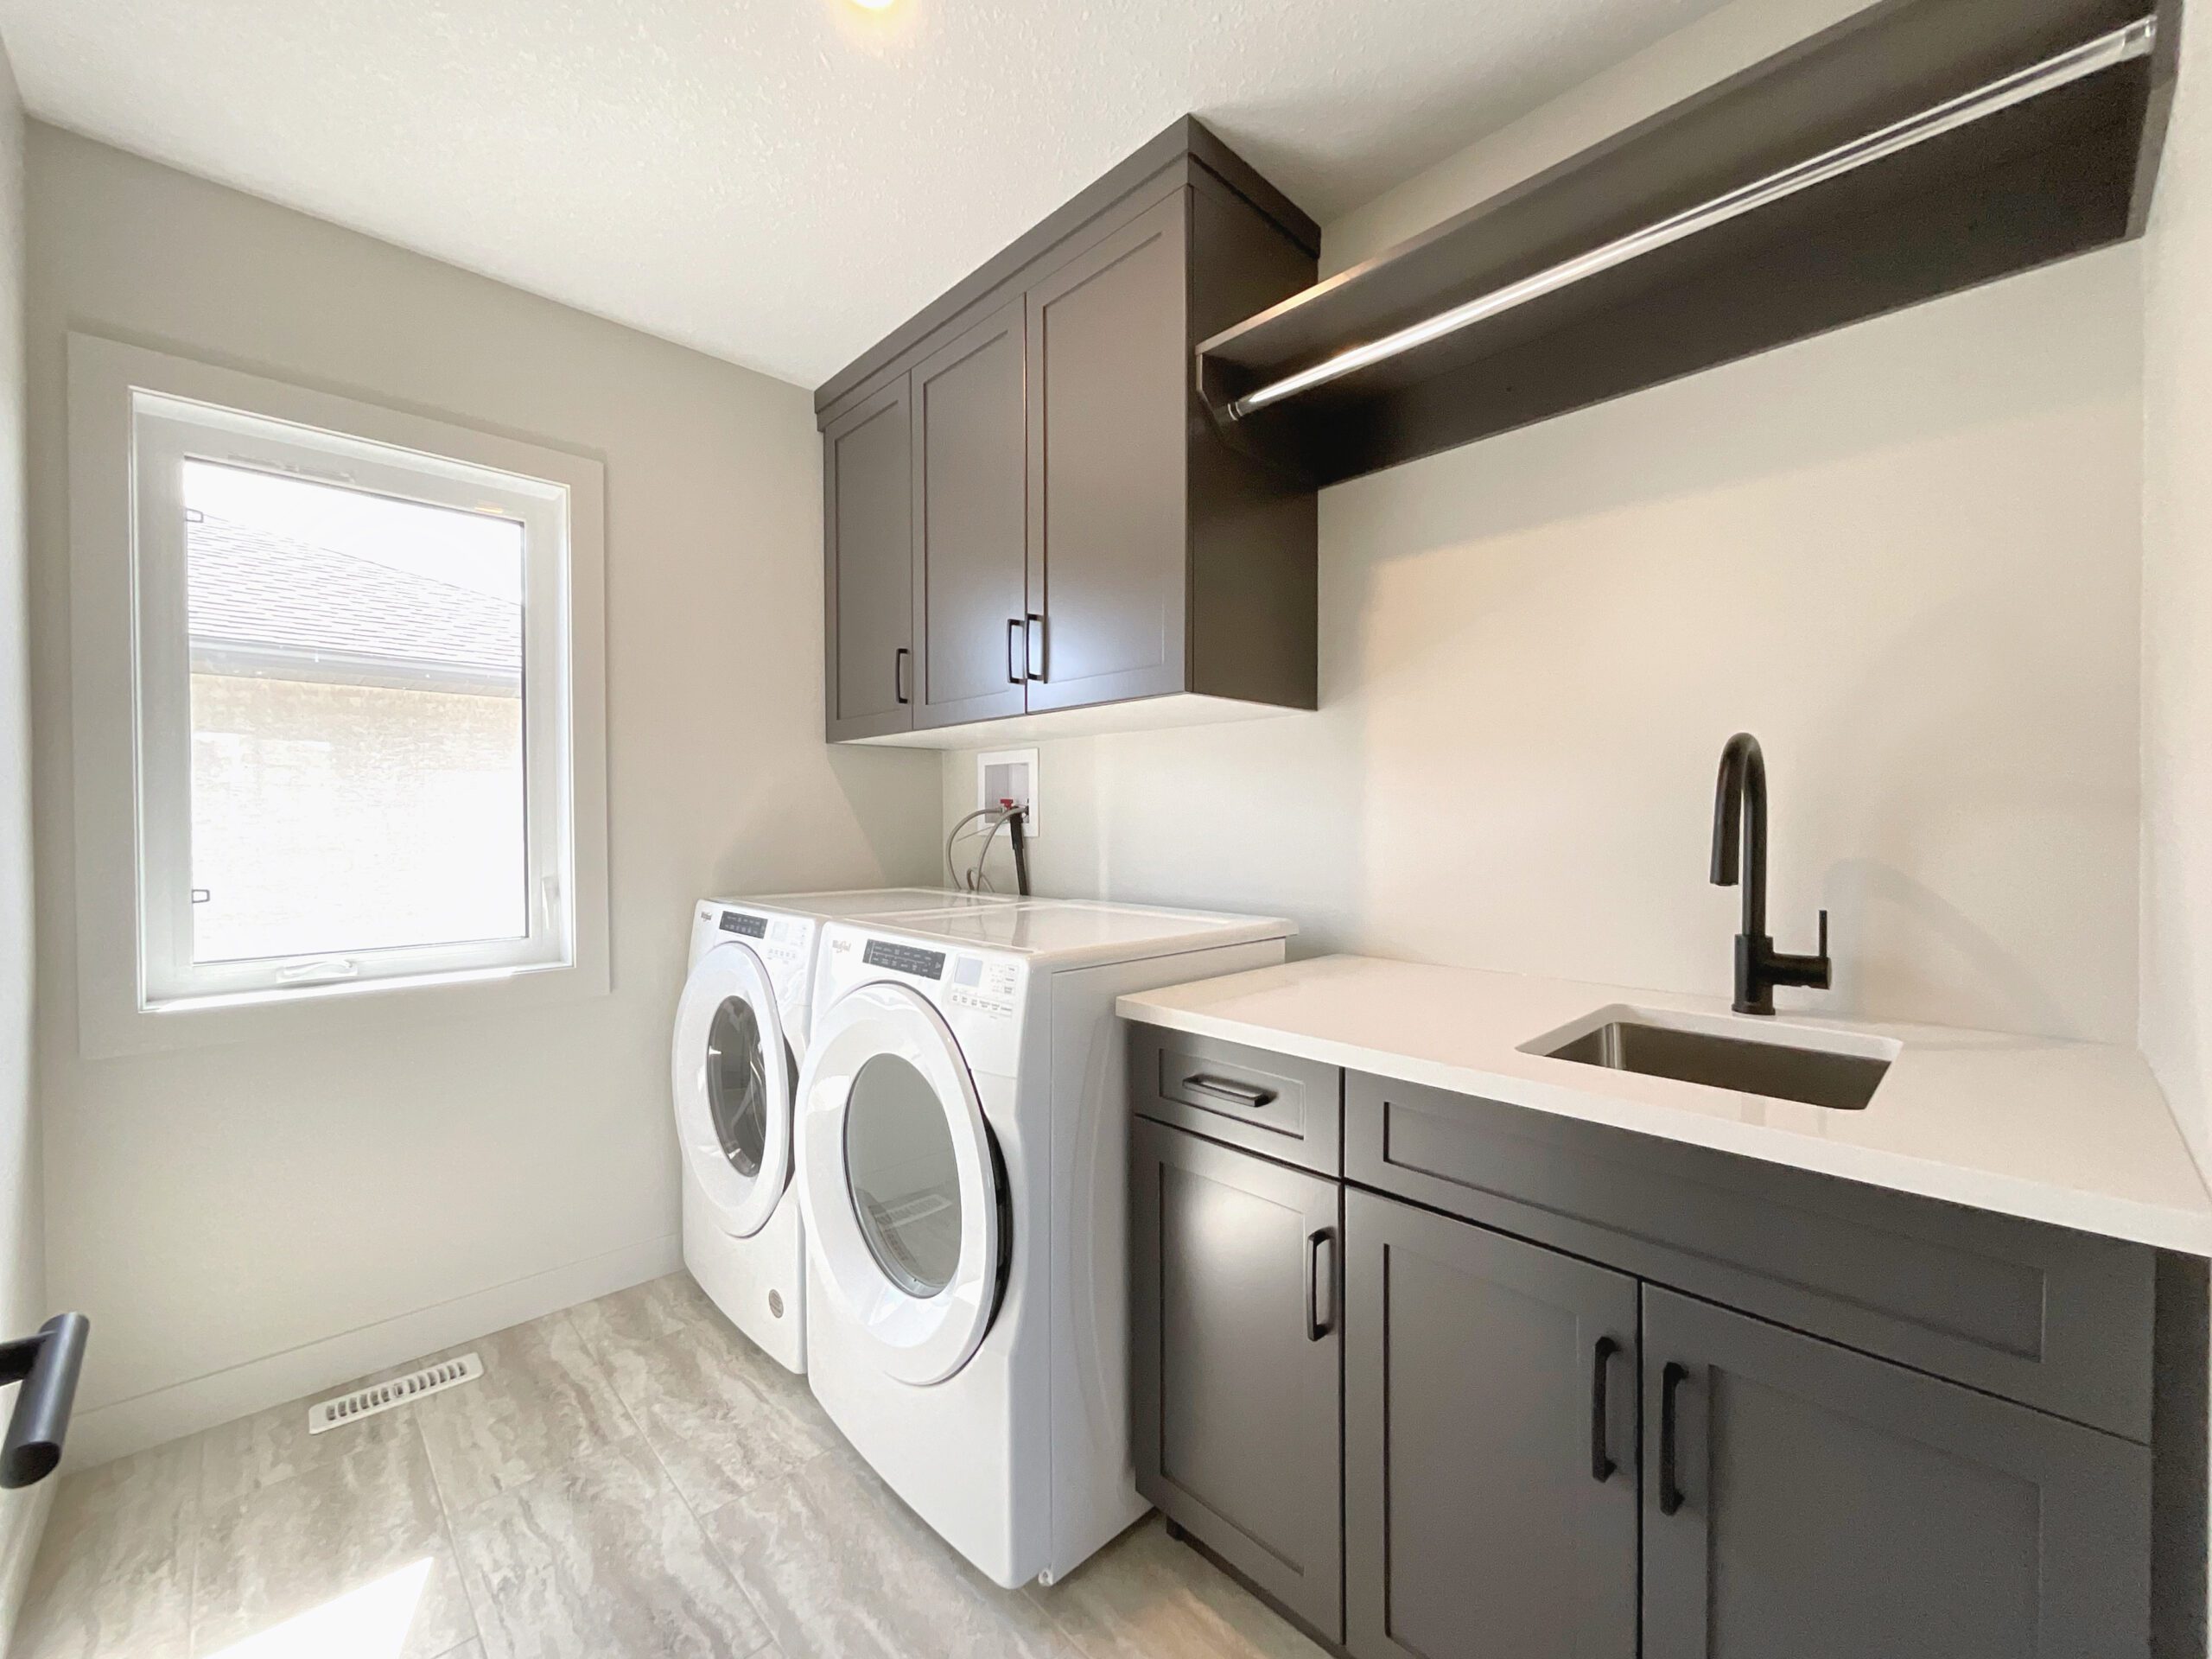 A laundry room with a side-by-side front-load washer and dryer and sink.